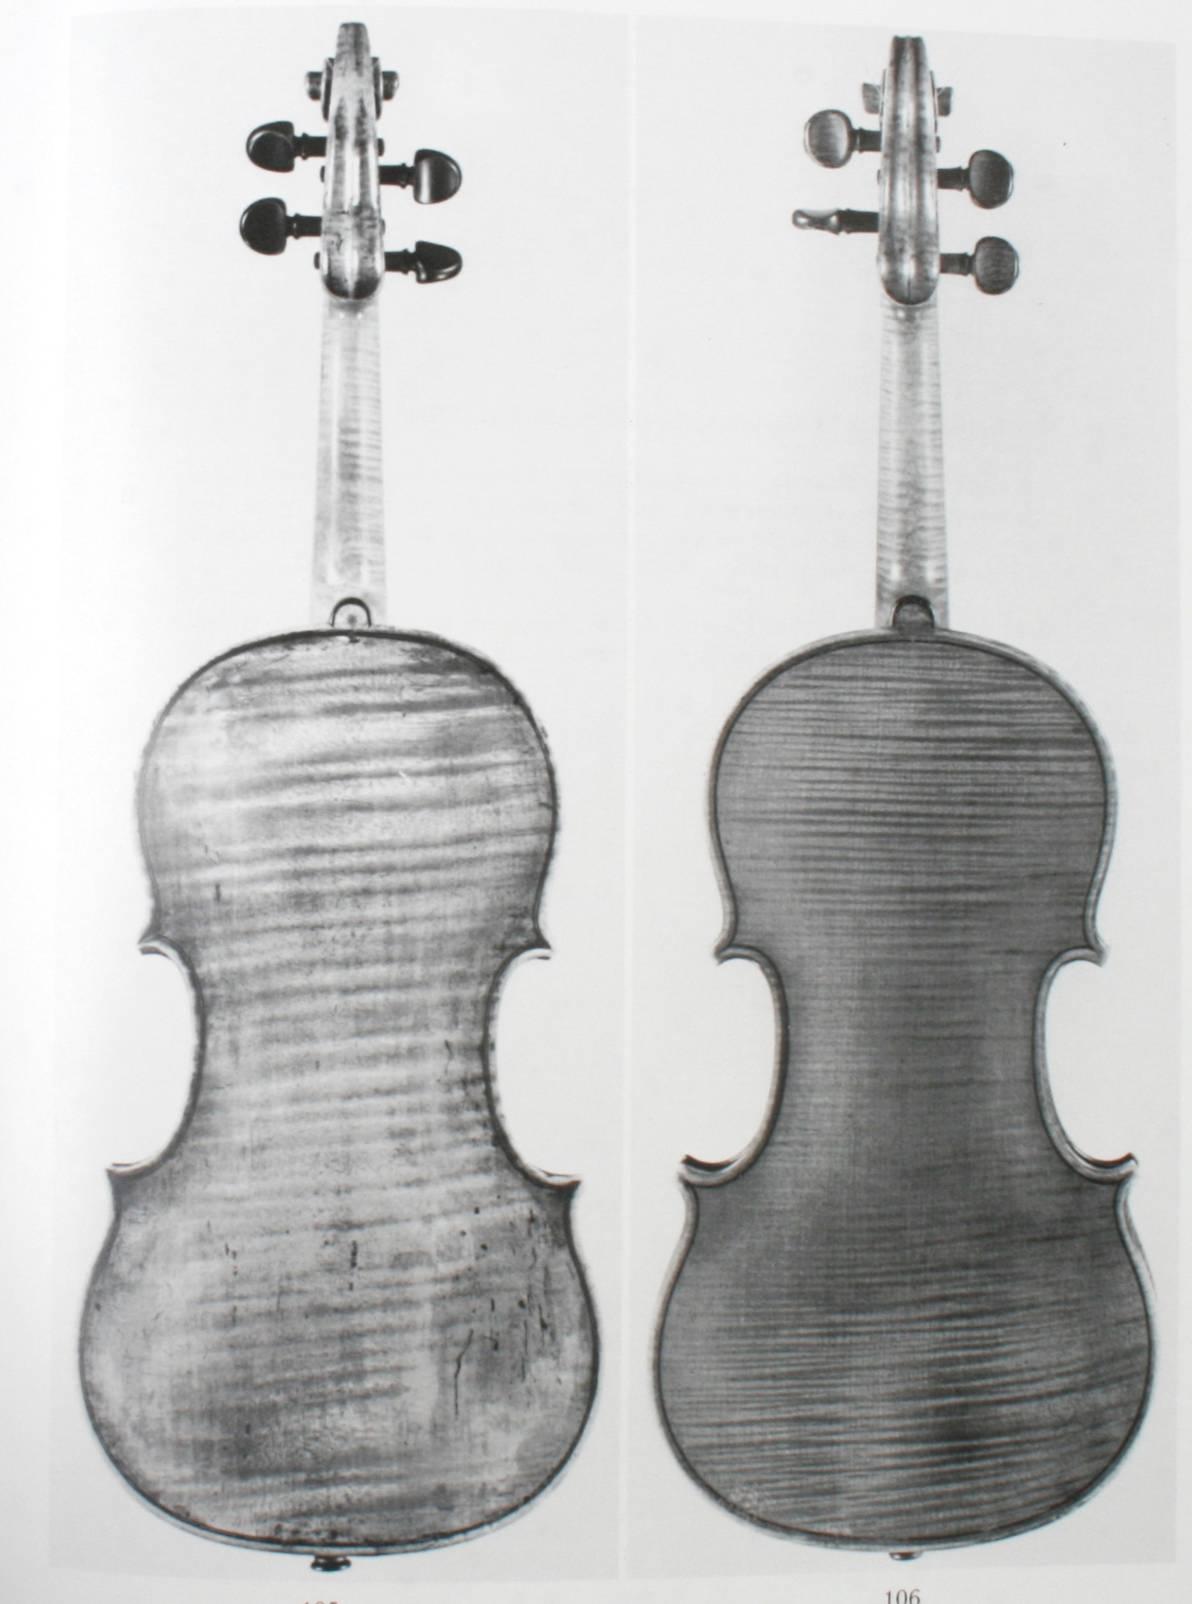 20th Century Two Sotheby's London Auction Catalogues on Musical Instruments For Sale